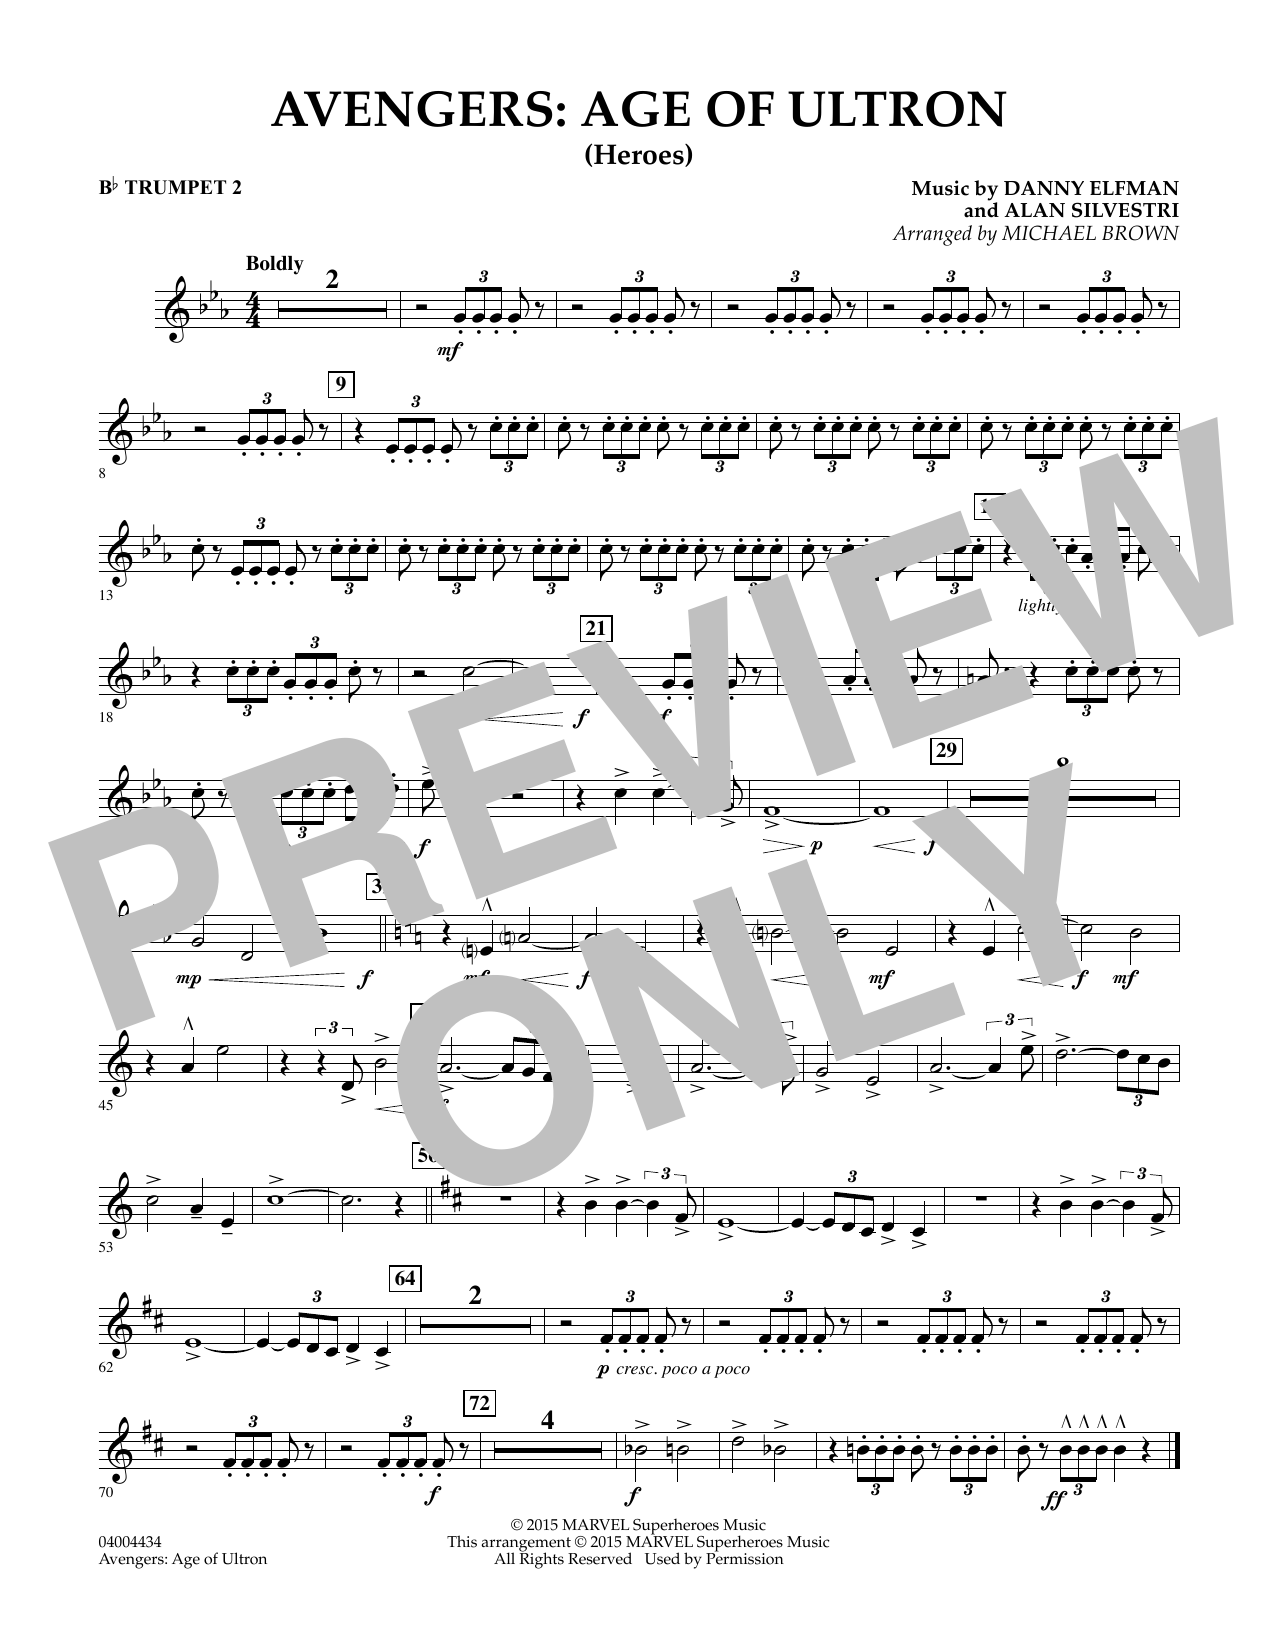 Michael Brown Avengers: The Age of Ultron (Main Theme) - Bb Trumpet 2 sheet music notes and chords. Download Printable PDF.